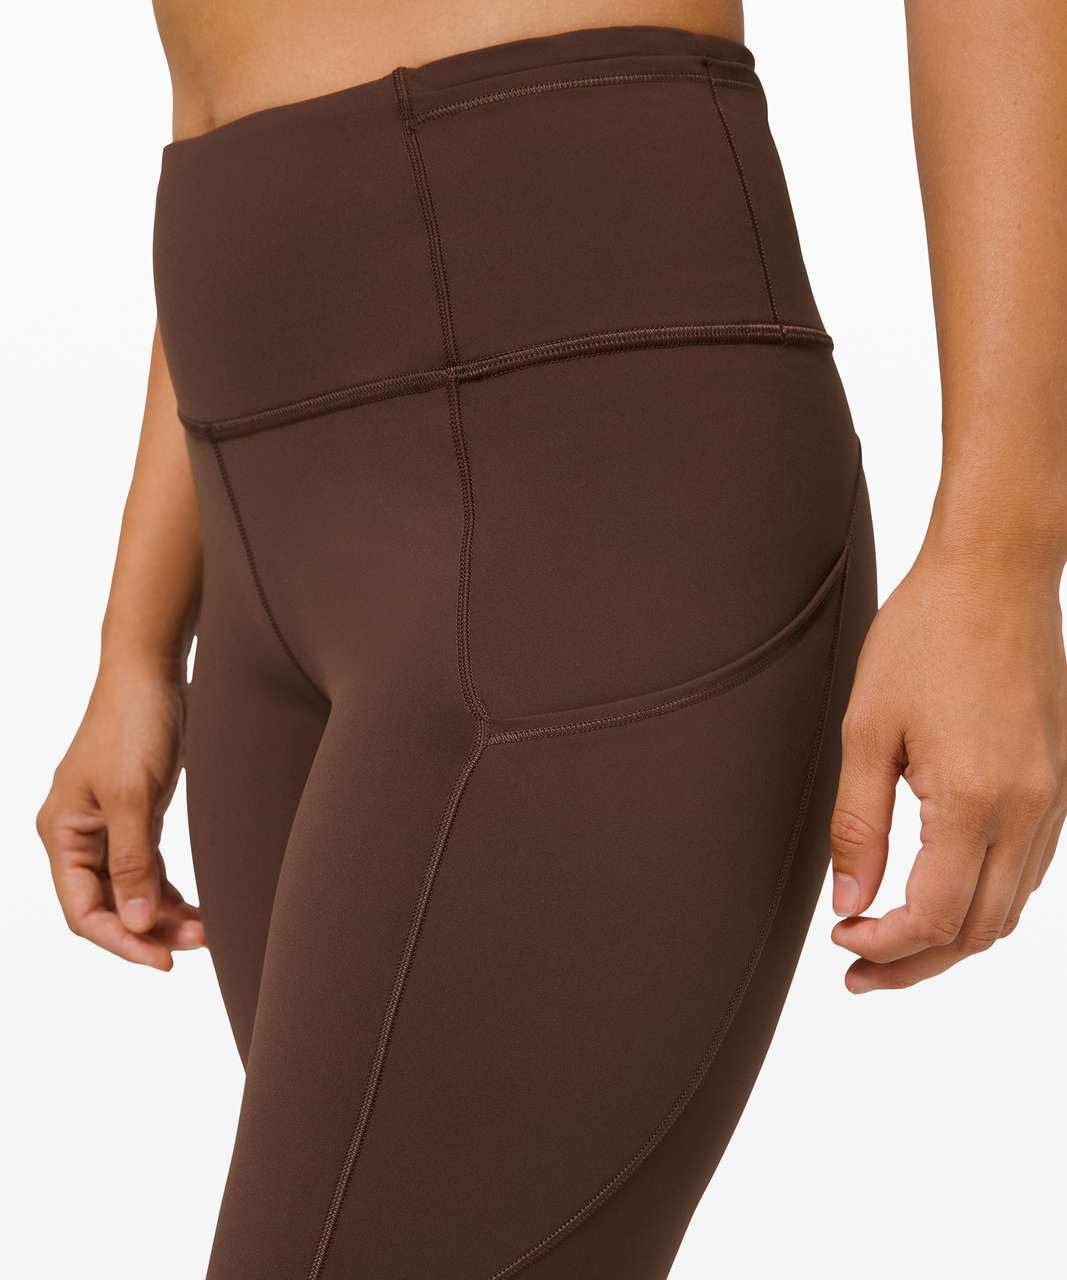 Lululemon Fast and Free High-Rise Tight 28" *Non-Reflective Brushed Nulux - Brown Earth